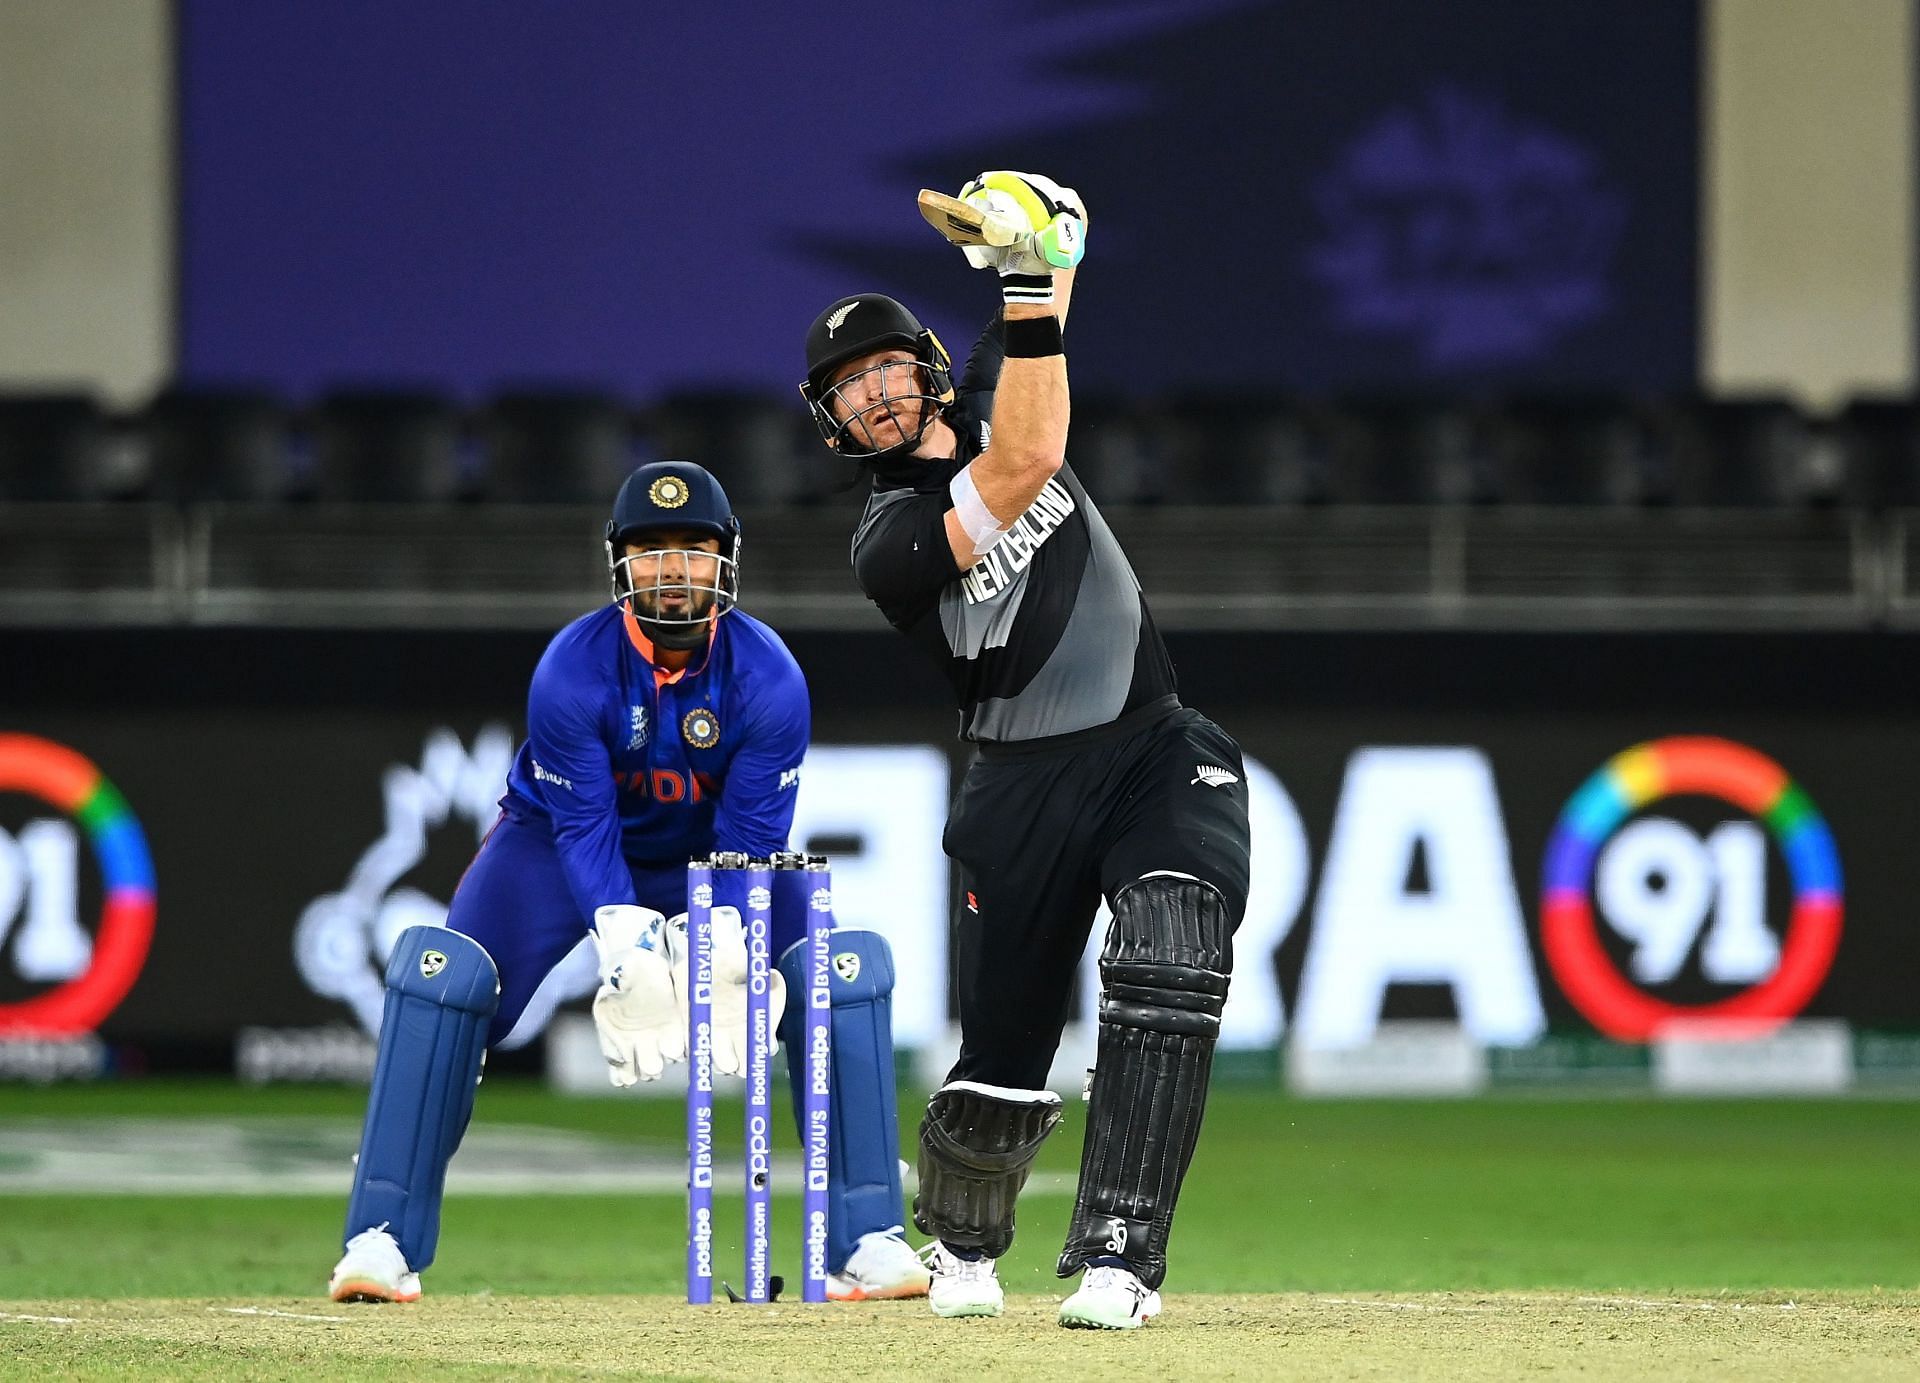 Martin Guptill will be the player to watch out for in the India vs New Zealand T20I series